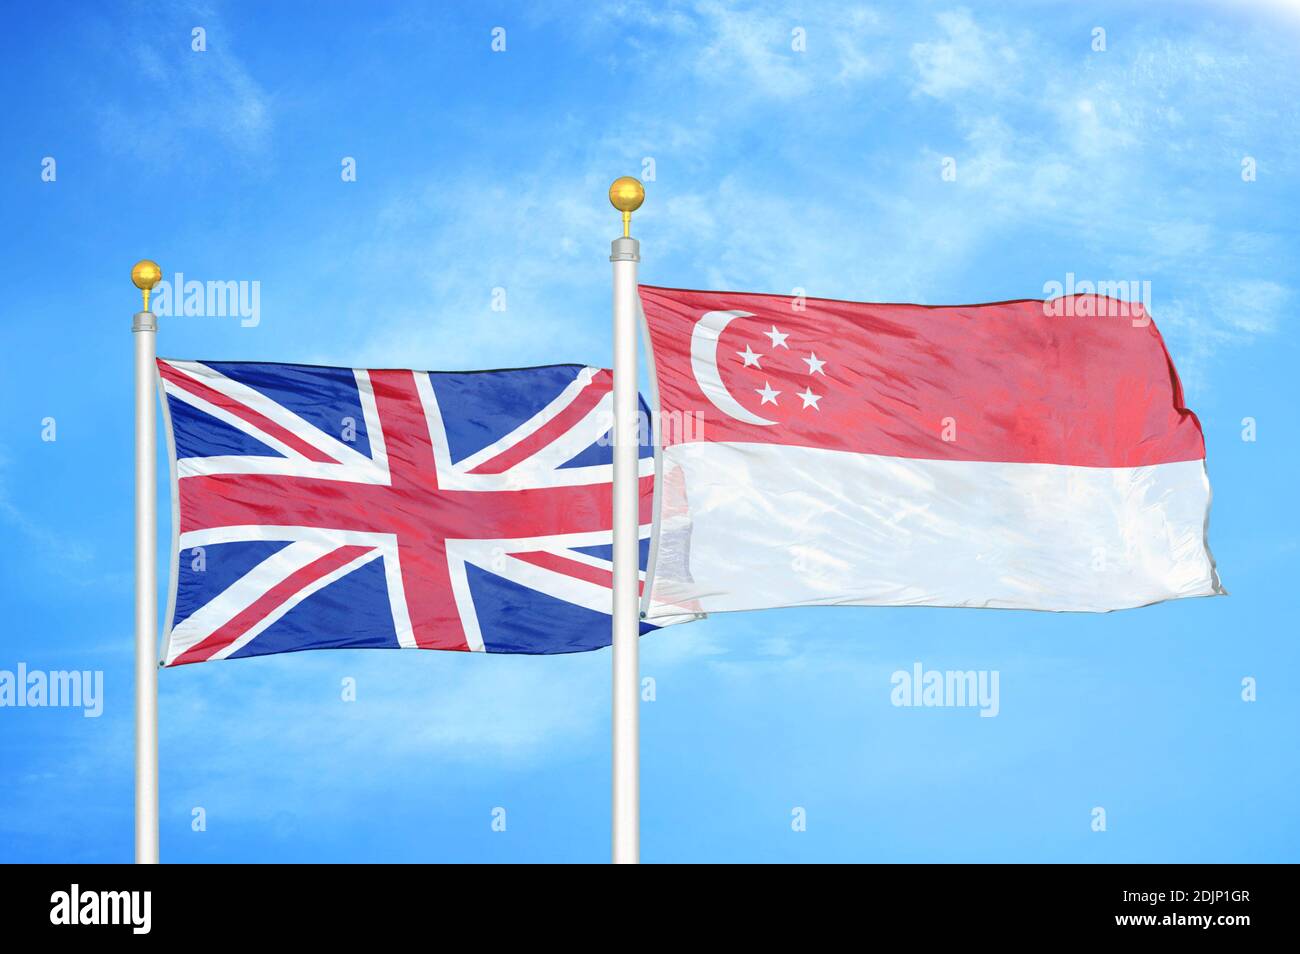 Brazil and Singapore two flags on flagpoles and blue cloudy sky Stock Photo